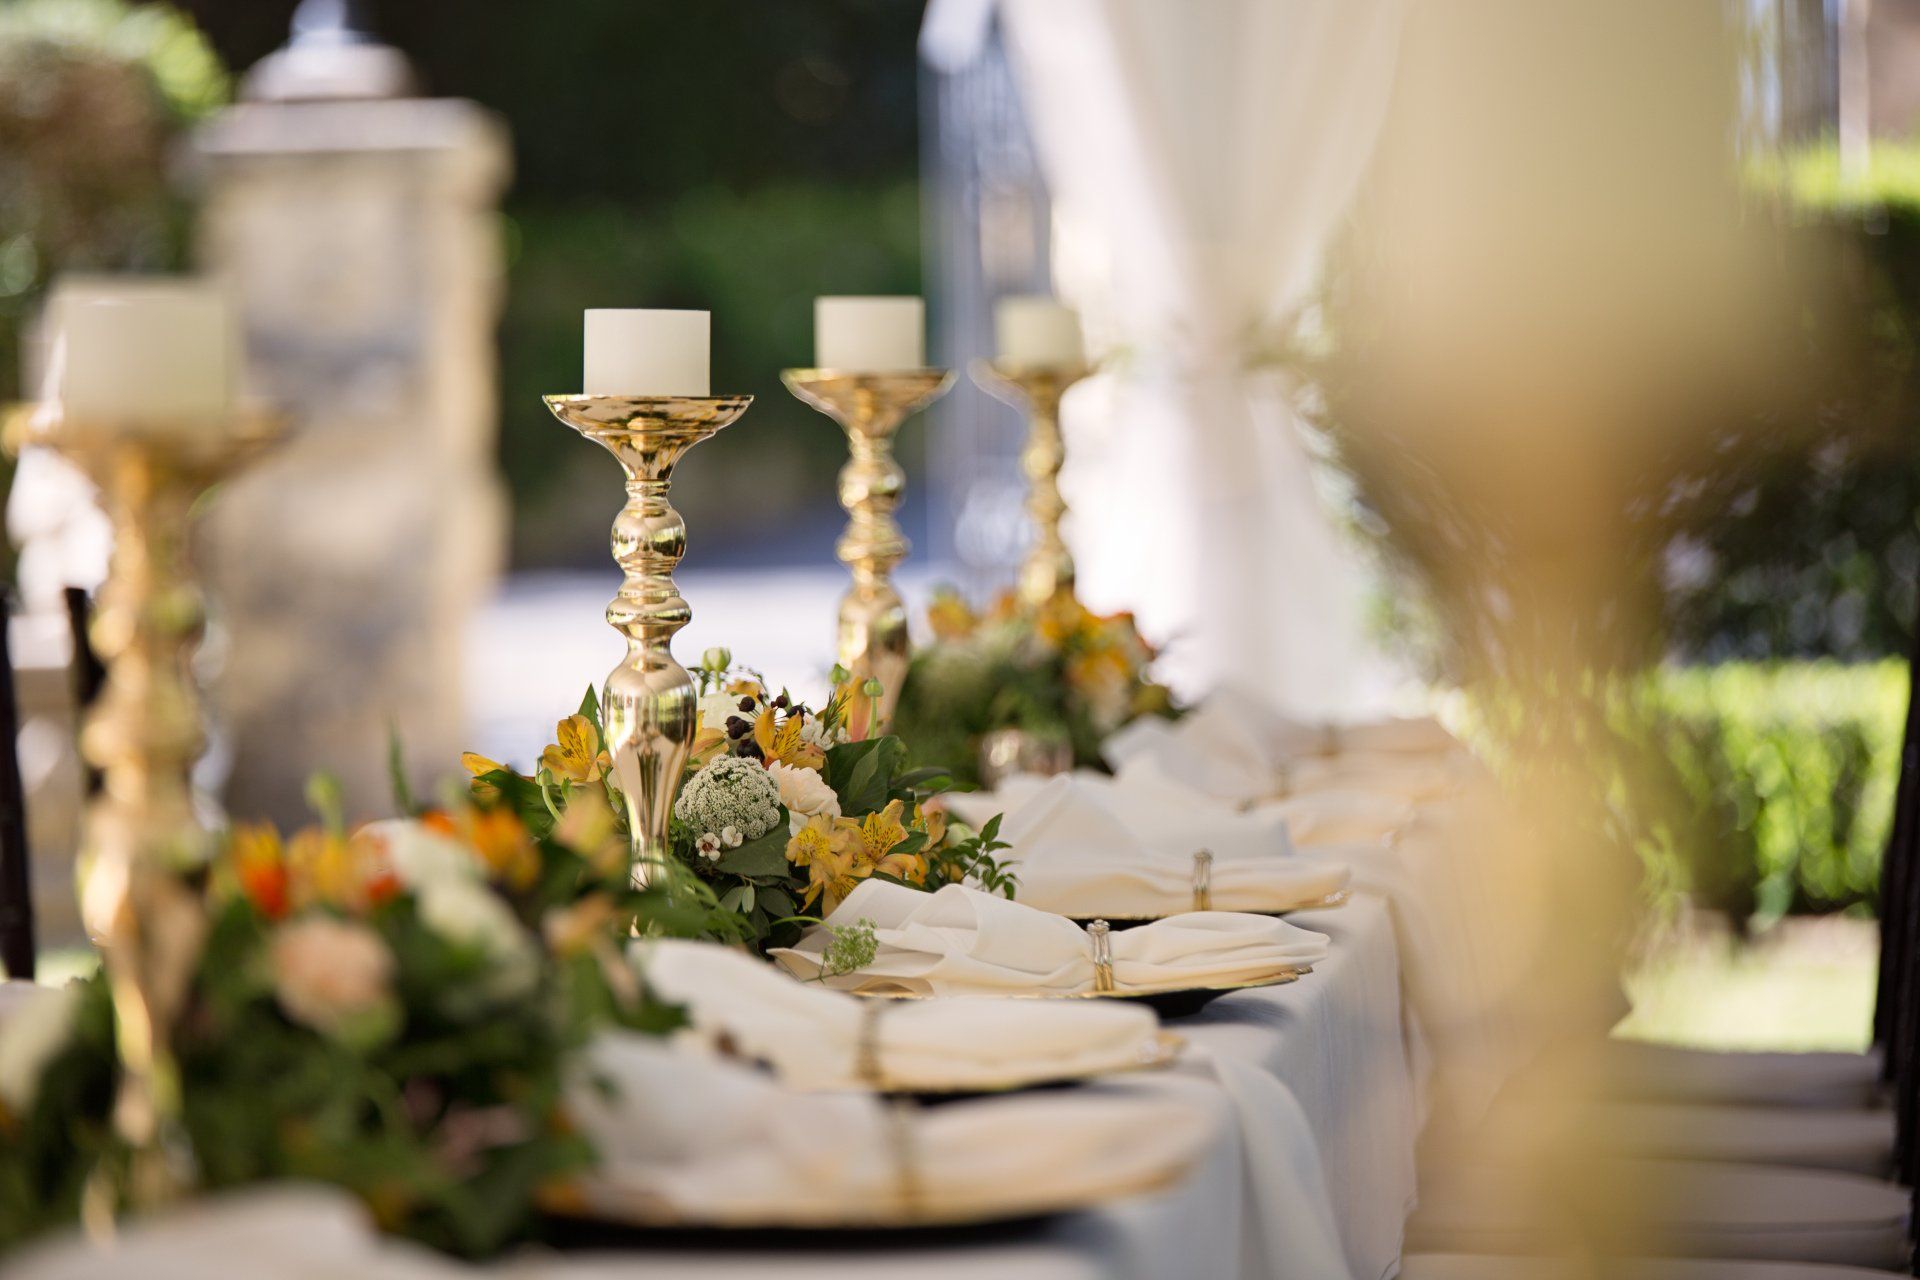 A long table with candles and flowers on it.